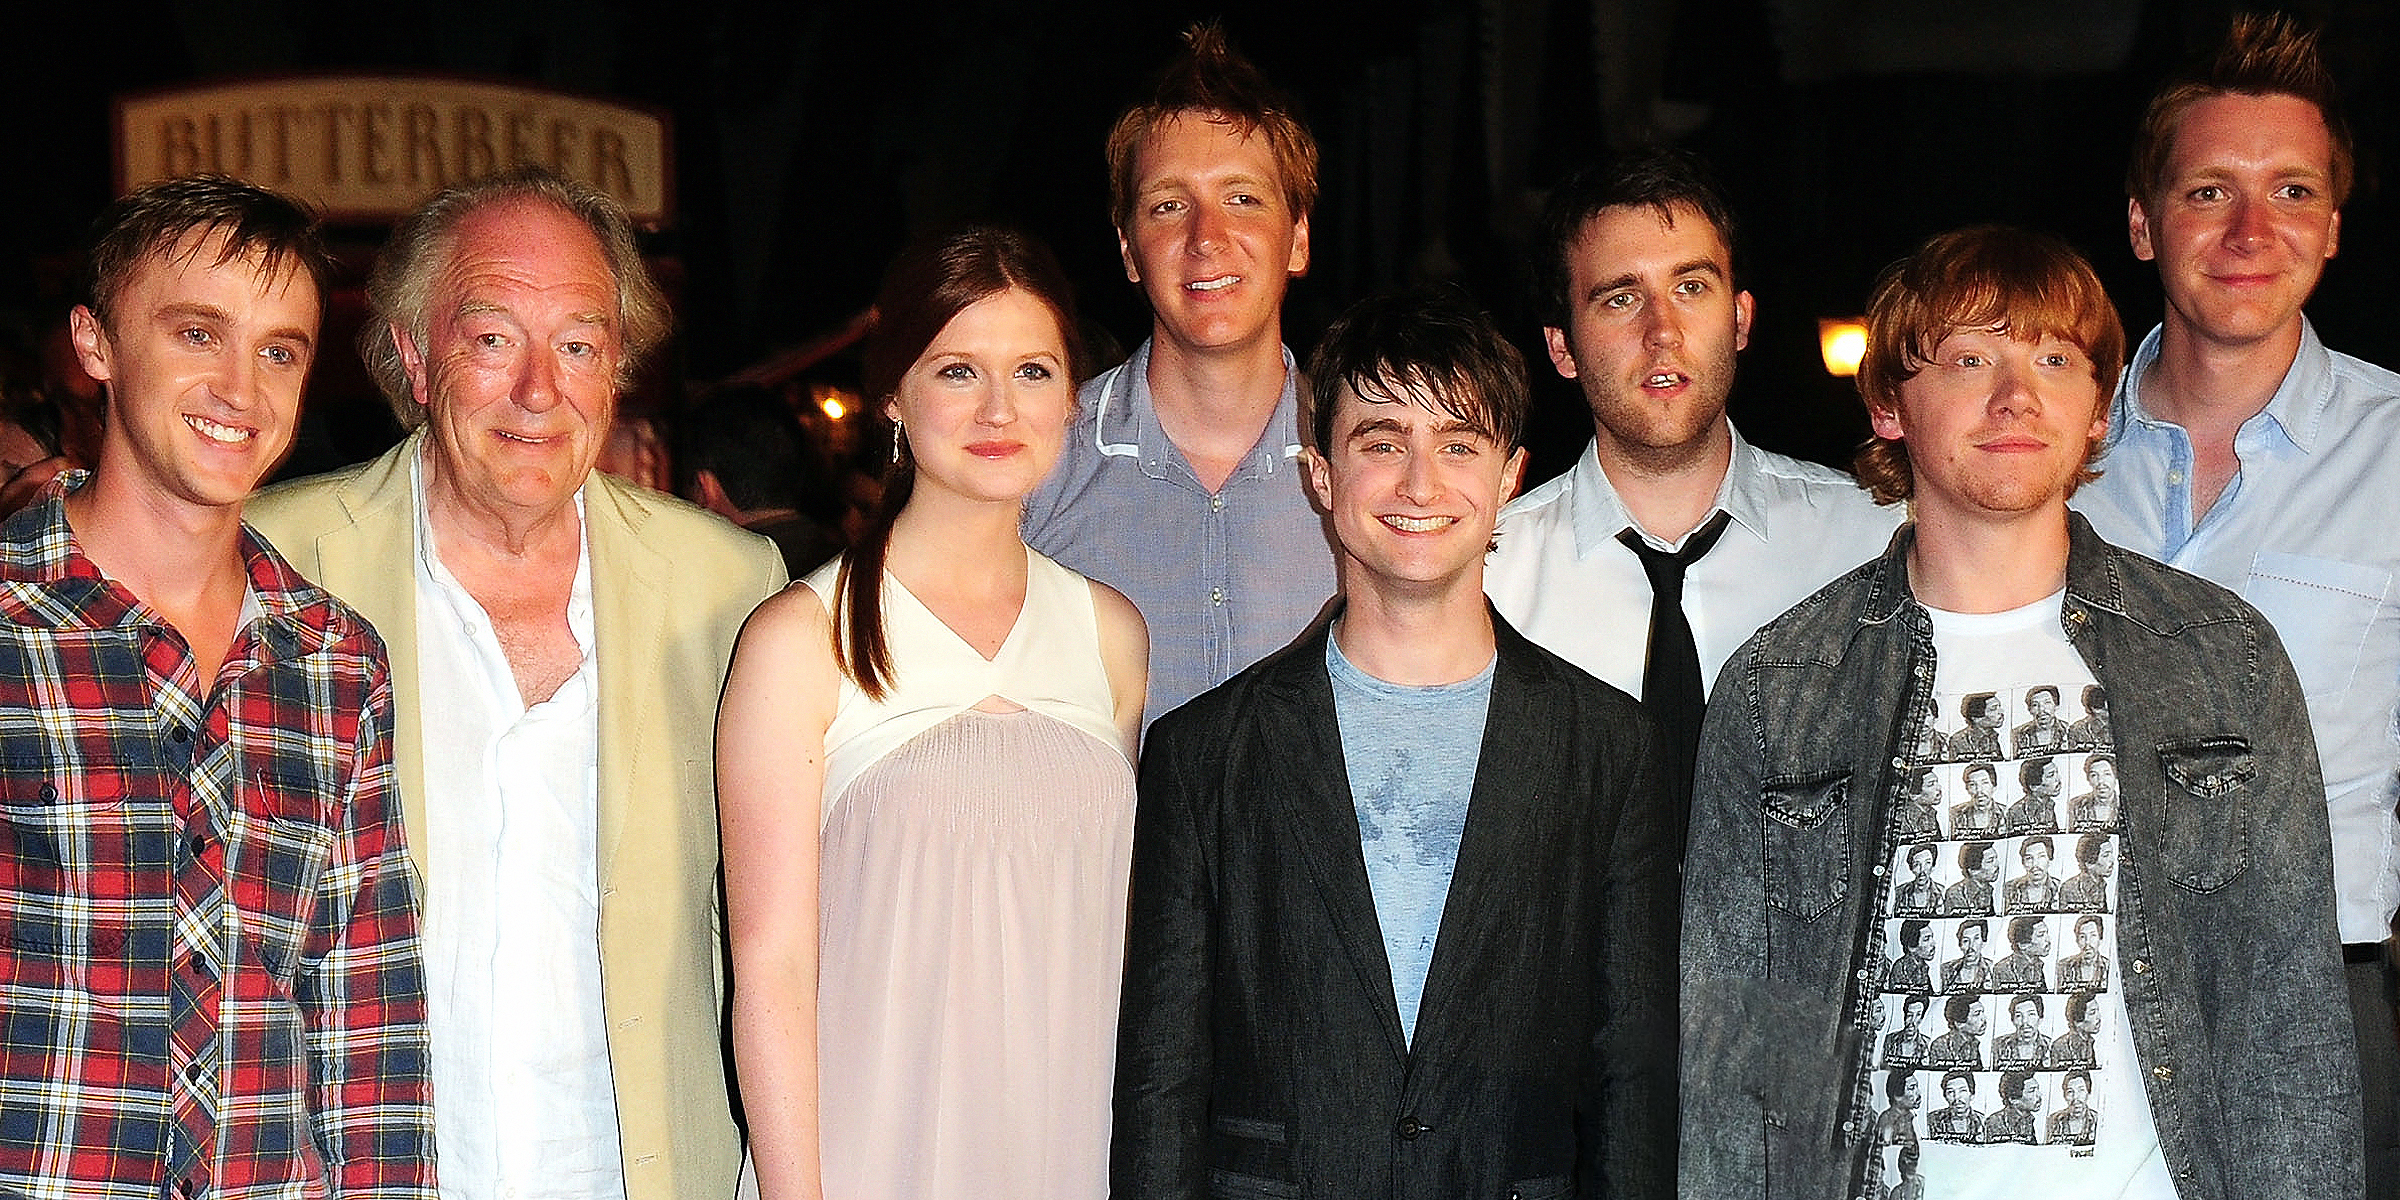 Sir Michael Gambon with some of the "Harry Potter" cast members. | Source: Getty Images